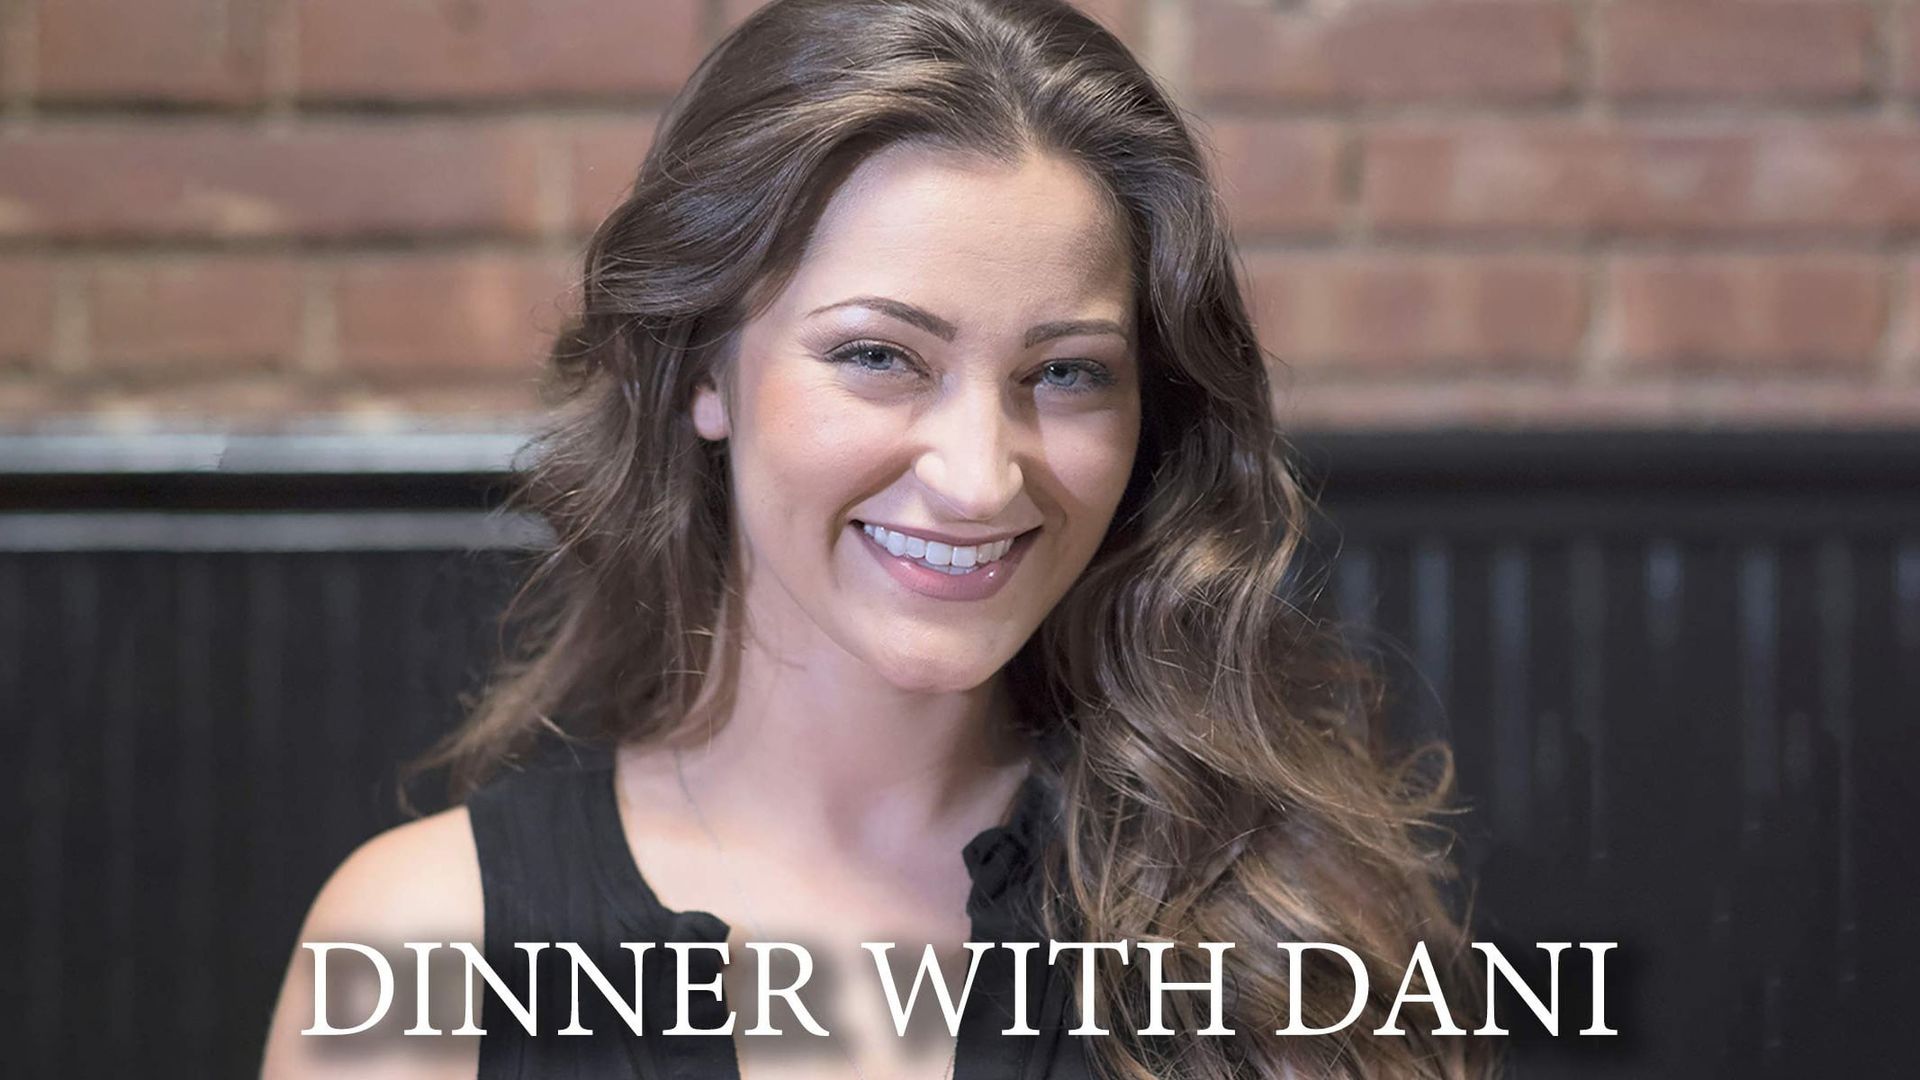 Dani Danial Fucking Videos - Dinner with Dani - Where to Watch Every Episode Streaming Online | Reelgood